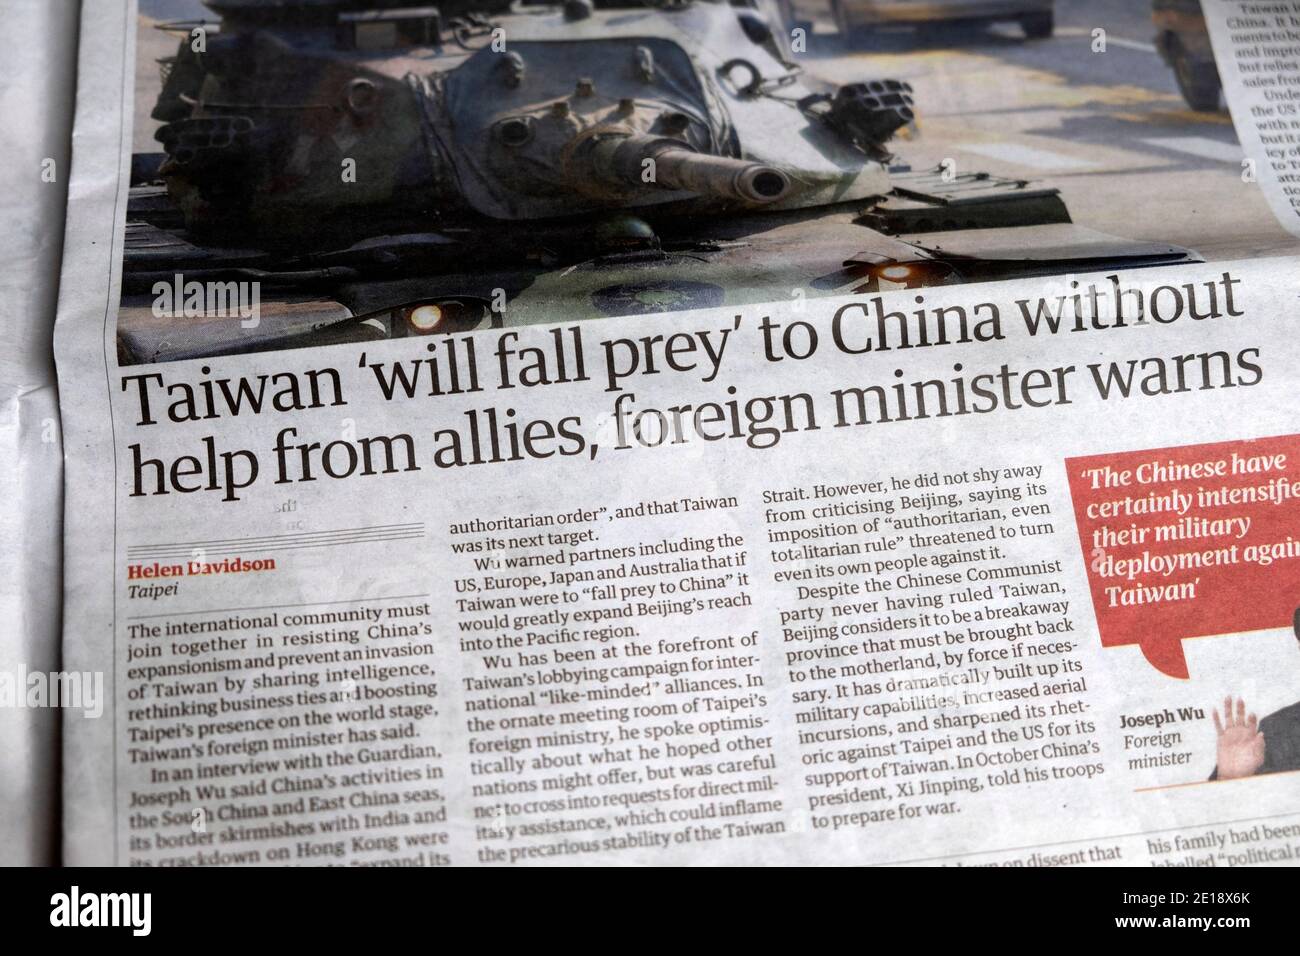 'Taiwan 'will fall prey' to China without help from allies, foreign minister warns' Guardian newspaper headline article 8 December 2020 London UK Stock Photo